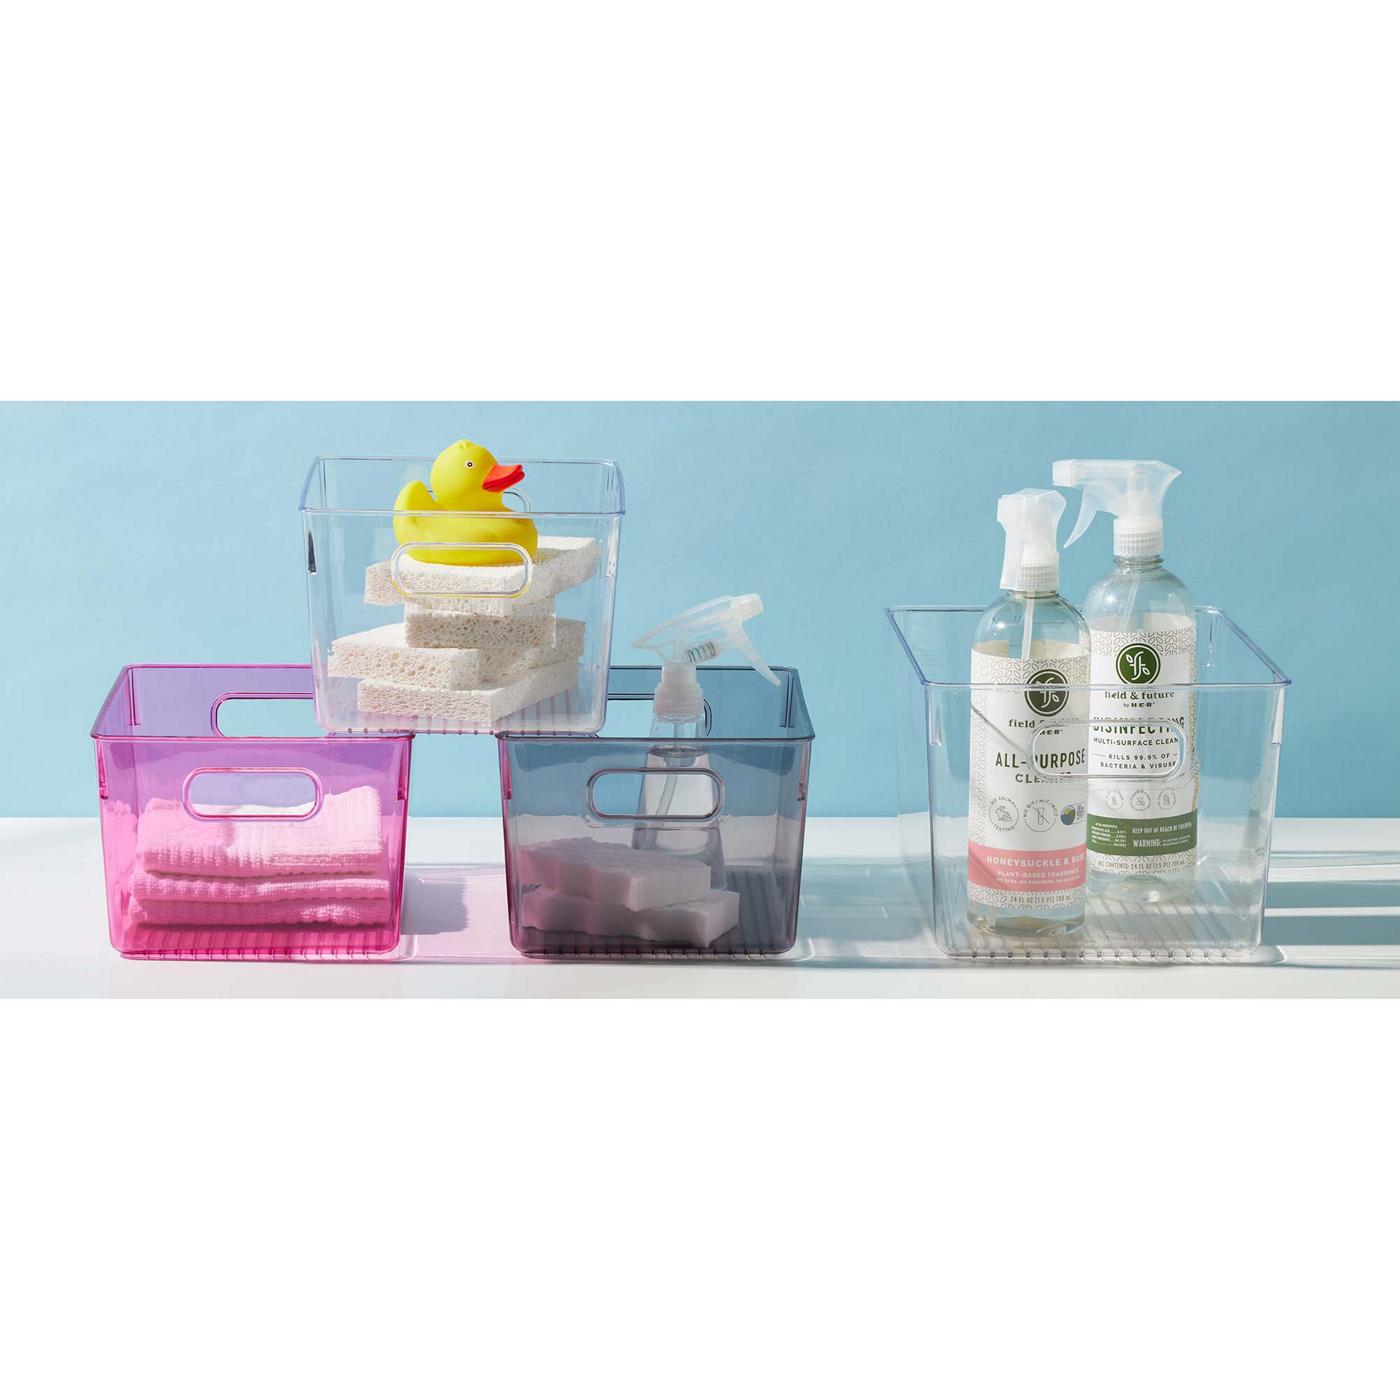 our goods Rectangle Storage Bin - Clear; image 2 of 3